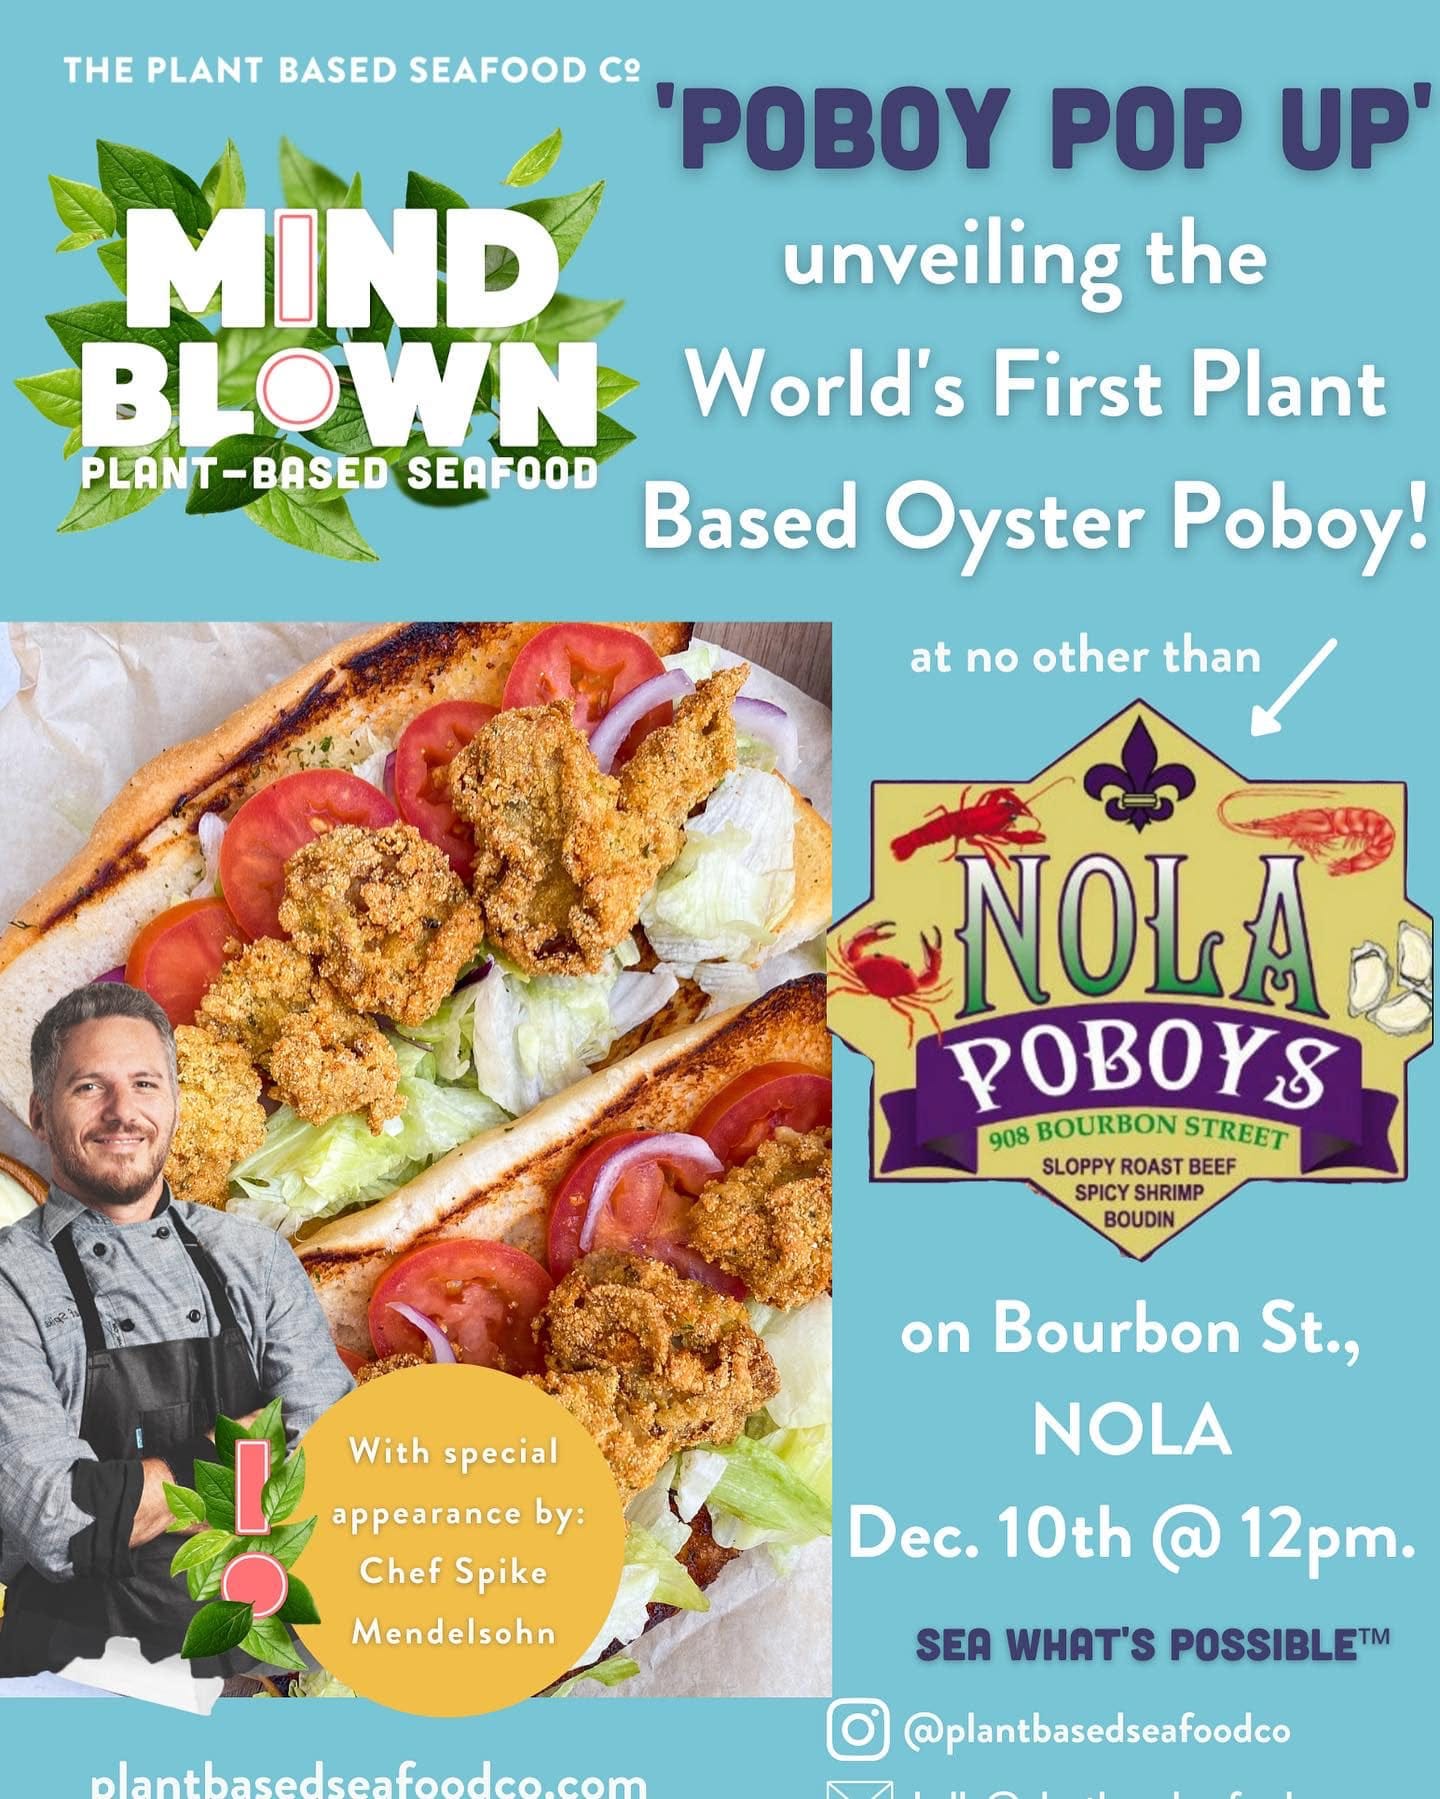 May be an image of 1 person, food and text that says 'THE PLANT BASED SEAFOOD C 'POBOY POP UP' MIND unveiling the BLOWN World's First Plant PLANT BASED SEAFOOD Based Oyster Poboy! at no other than NOLA POBOYS 908 BOURBON STREET SLOPPY ROAST BEEF SPICY SHRIMP BOUDIN Withspecial With special appearance by: Chef Spike Mendelsohn on Bourbon St., NOLA Dec. 10th 12pm. SEA WHAT'S POSSIBLE™ @plantbasedseafoodco'